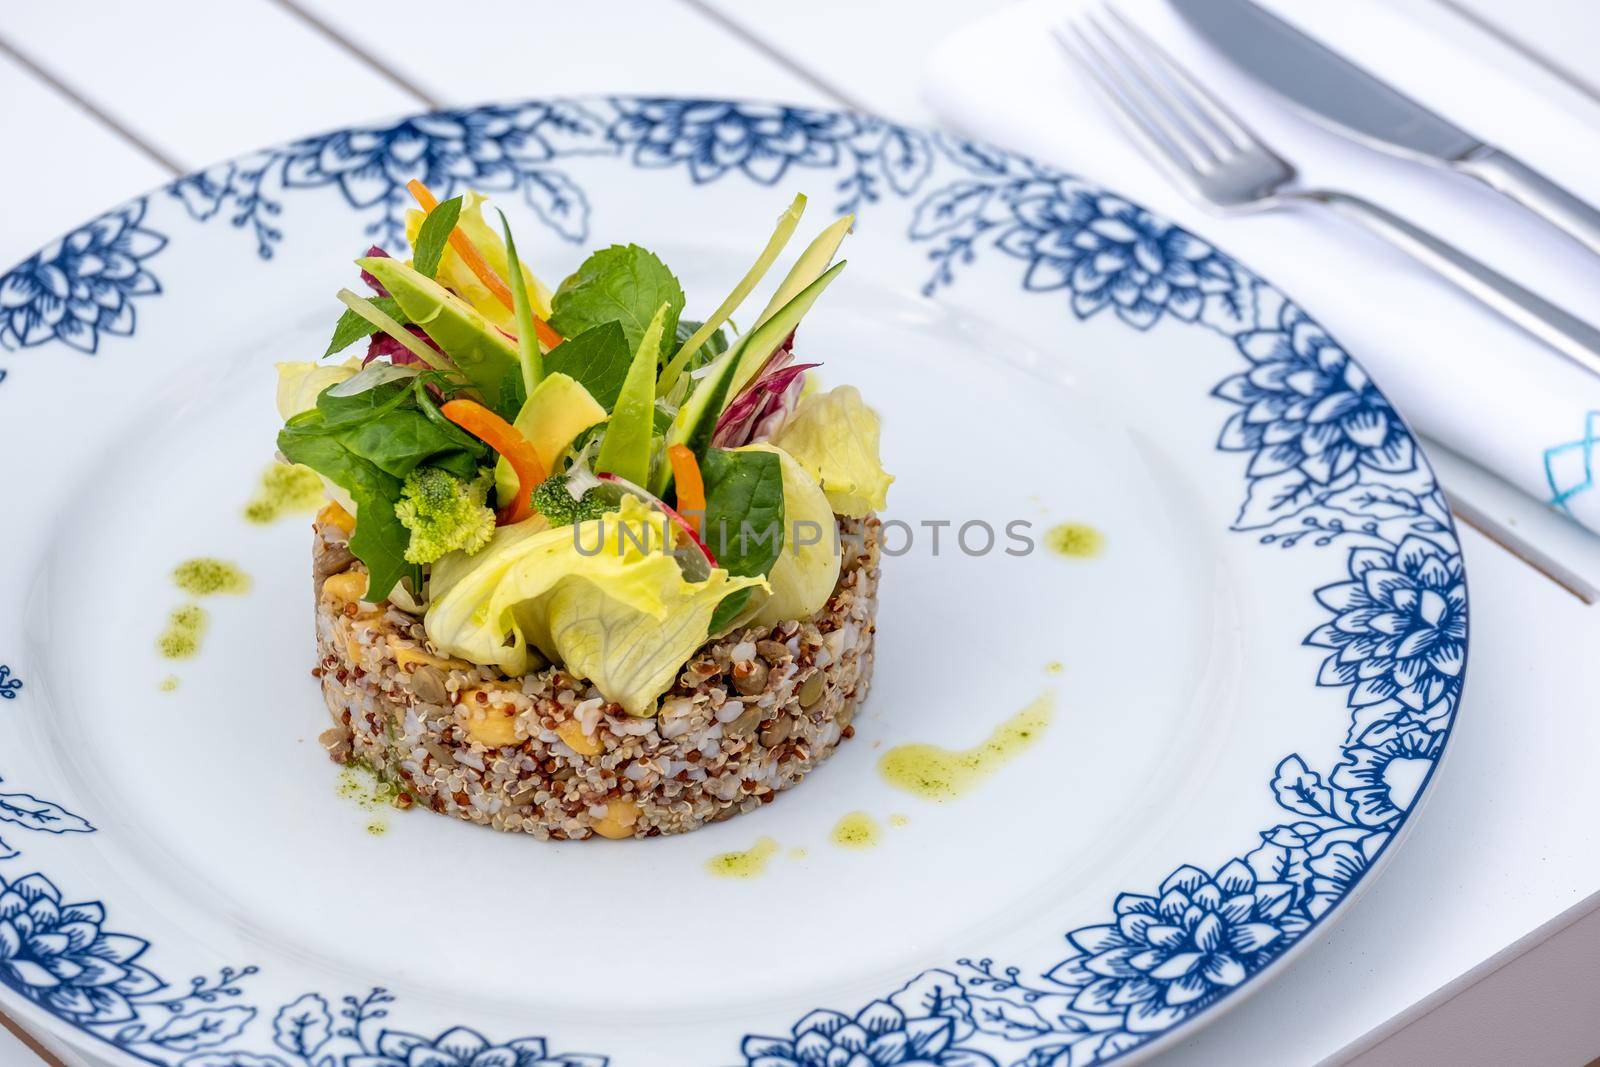 Quinoa salad with avocado, carrot, chickpeas and fresh greens by Sonat